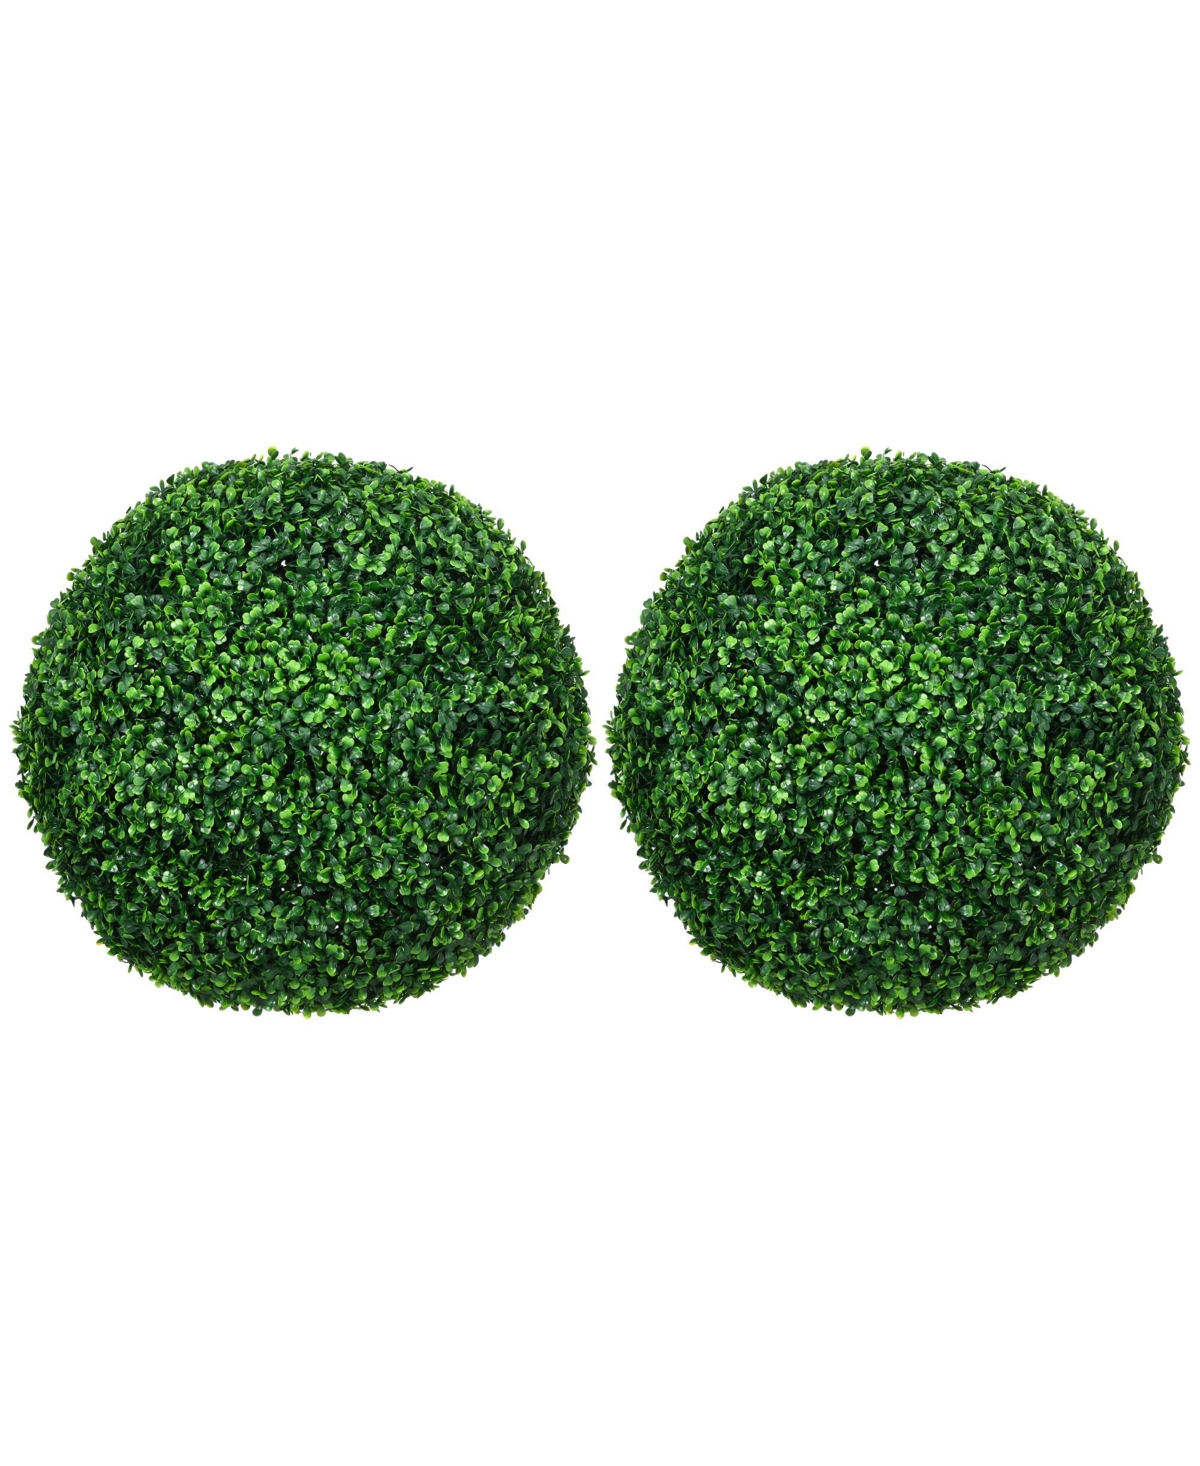 2 Pack Artificial Tree Boxwood Topiary Balls, 19.75 Inch - Green